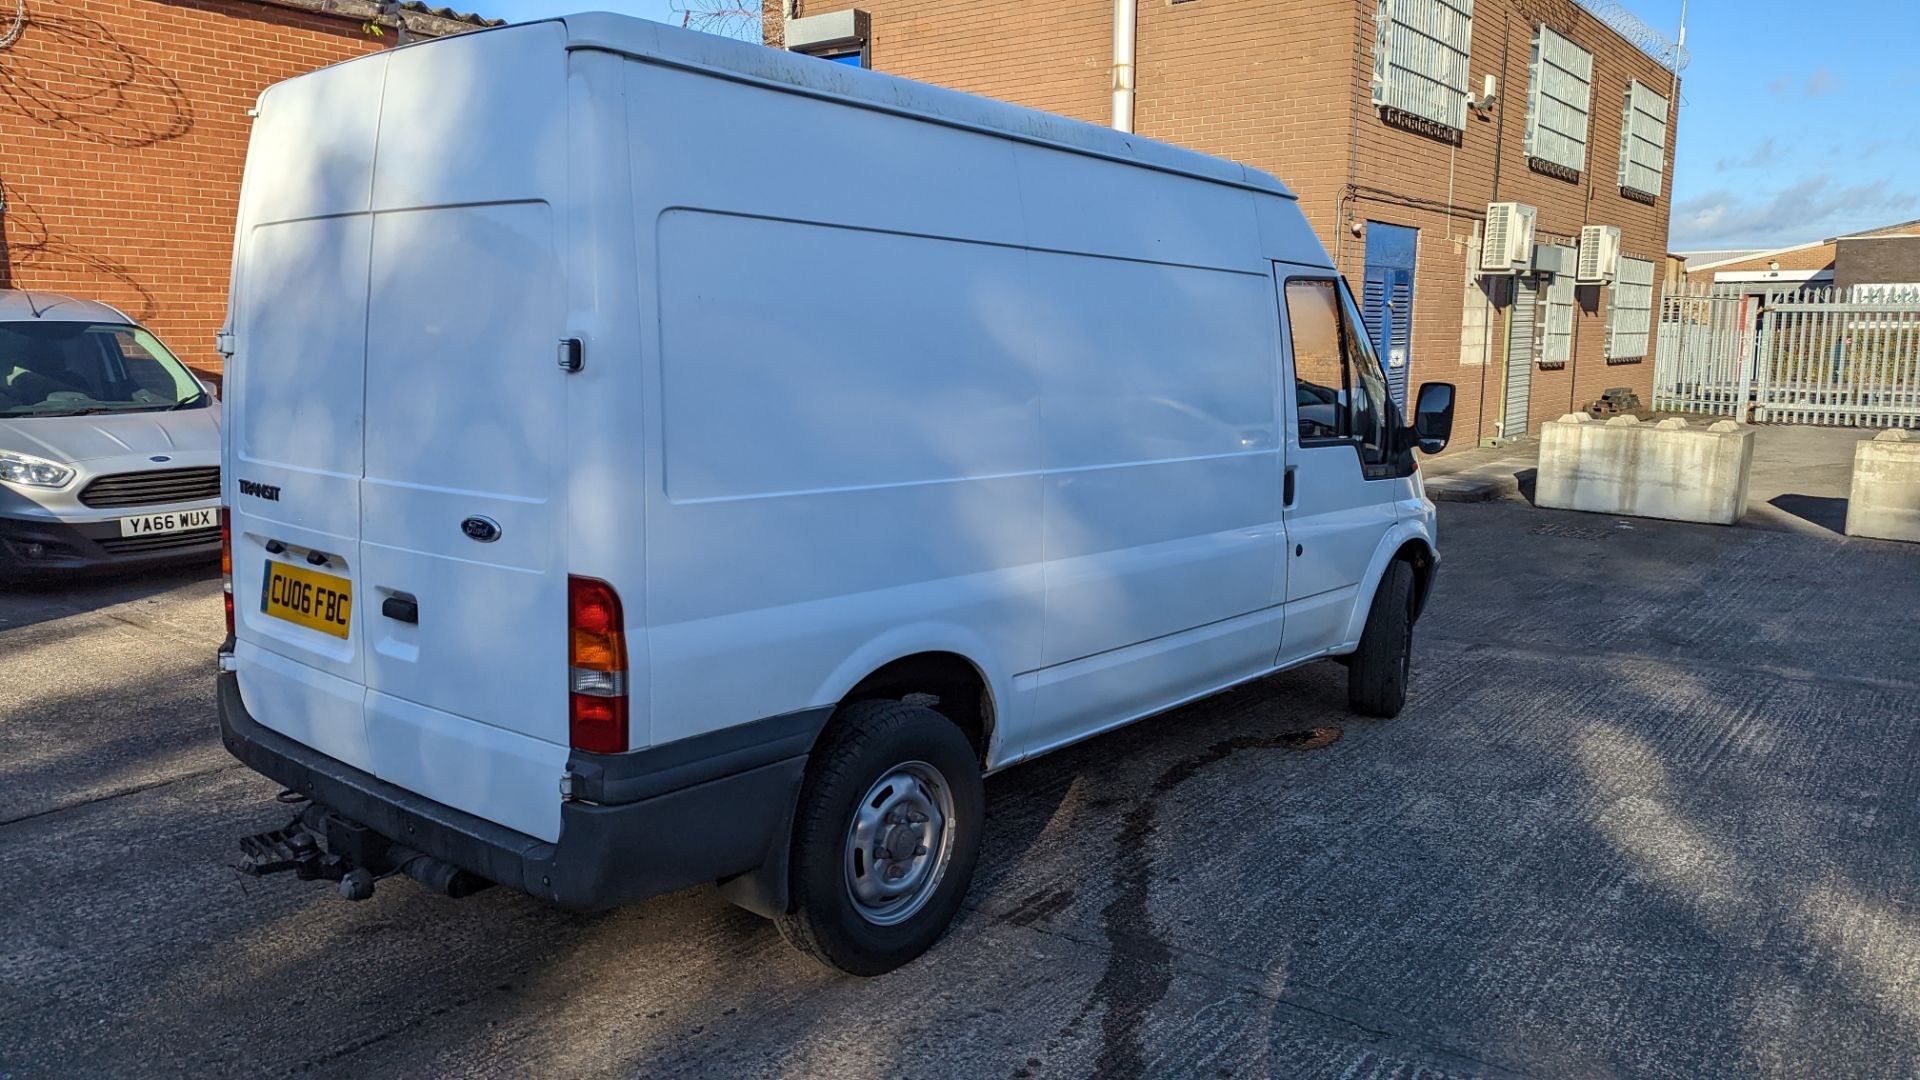 CU06 FBC Ford Transit panel van, 6 speed manual gearbox, 2402cc diesel engine. Colour: white. Fir - Image 8 of 44